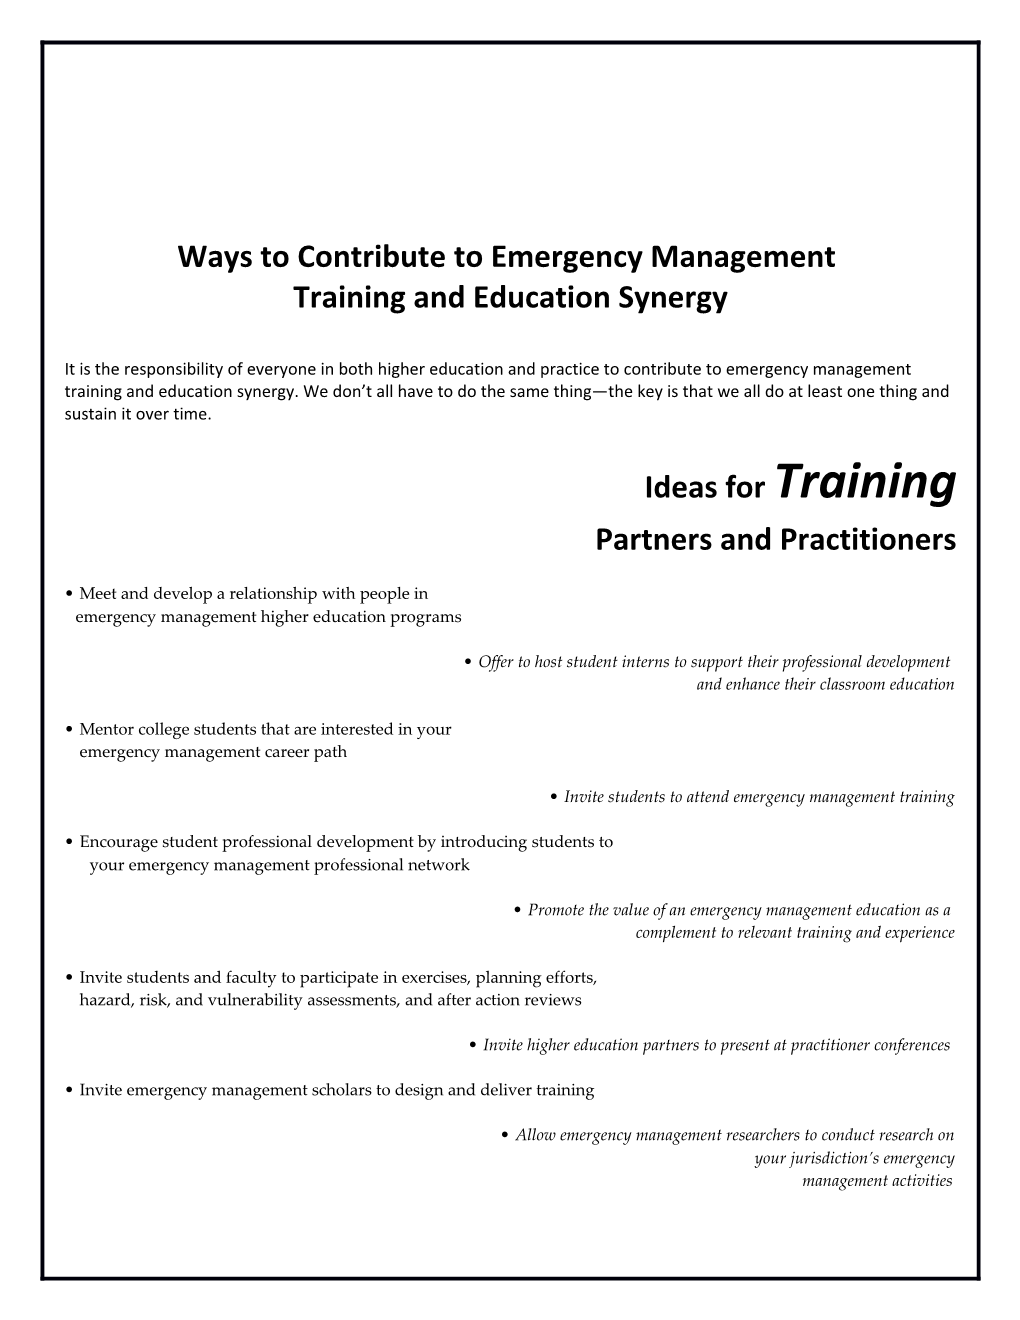 Ways to Contribute to Emergency Management